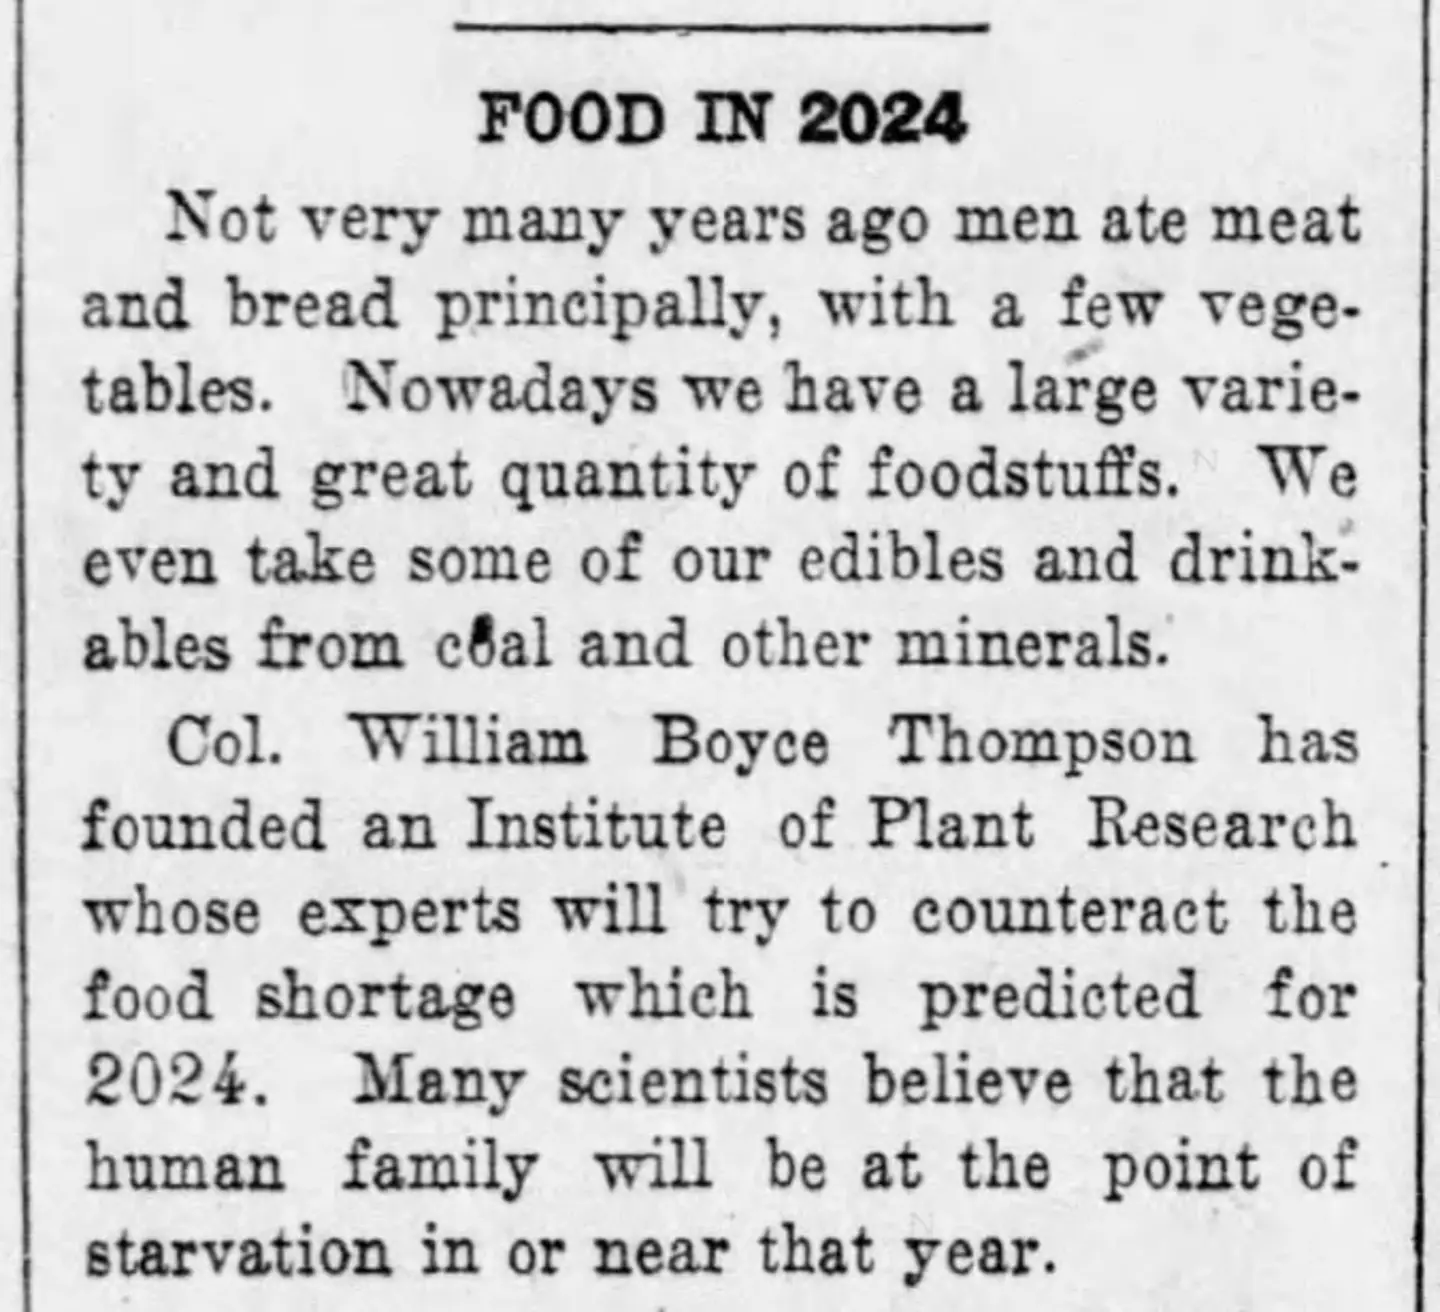 Thankfully, we’re not all at the point of starvation as predicted here.